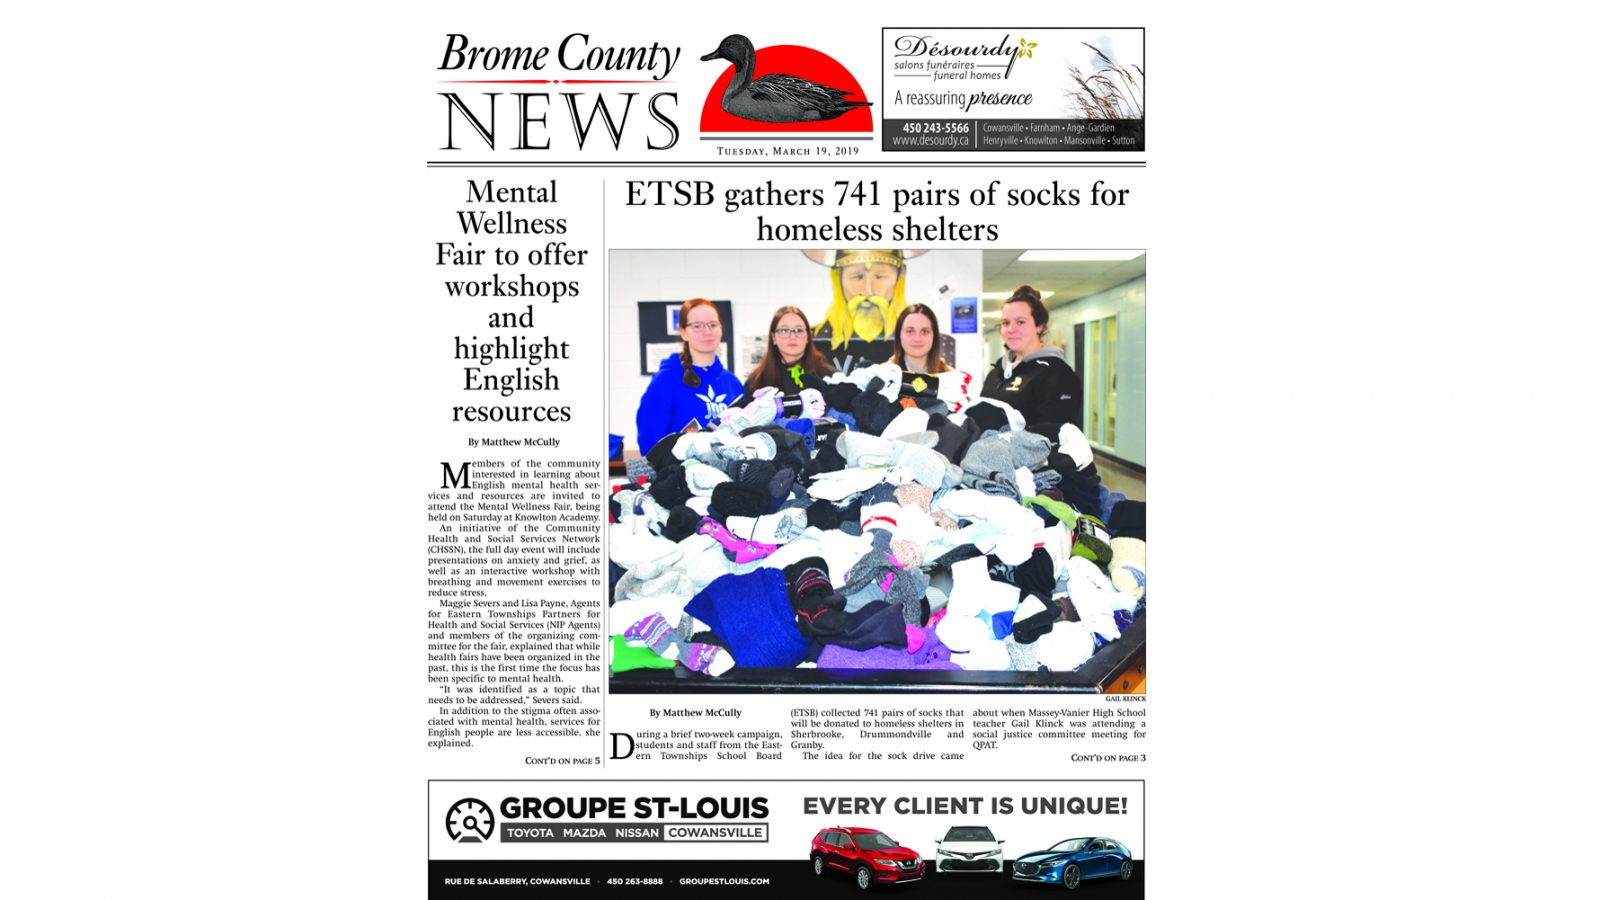 Brome County News – March 19, 2019 edition